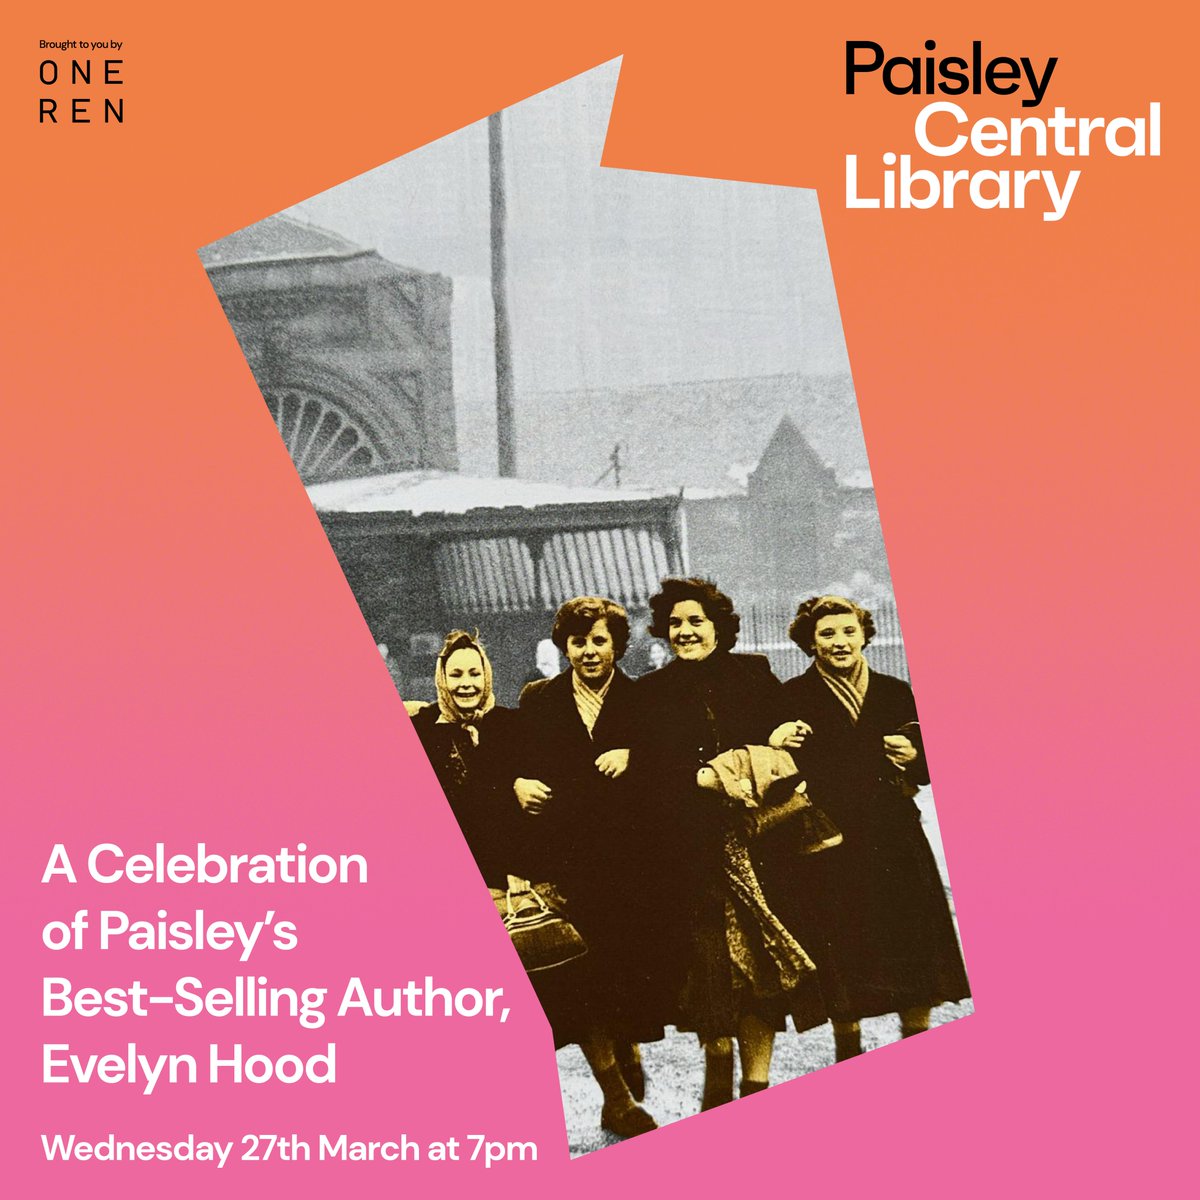 Join us at Paisley Central Library for a celebration of Paisley's best-selling author, Evelyn Hood. Delve into Evelyn's timeless works with her son Simon, including the re-issue of her beloved 'Mill Memories' book. Book your FREE tickets now👉 bit.ly/3vinWY8